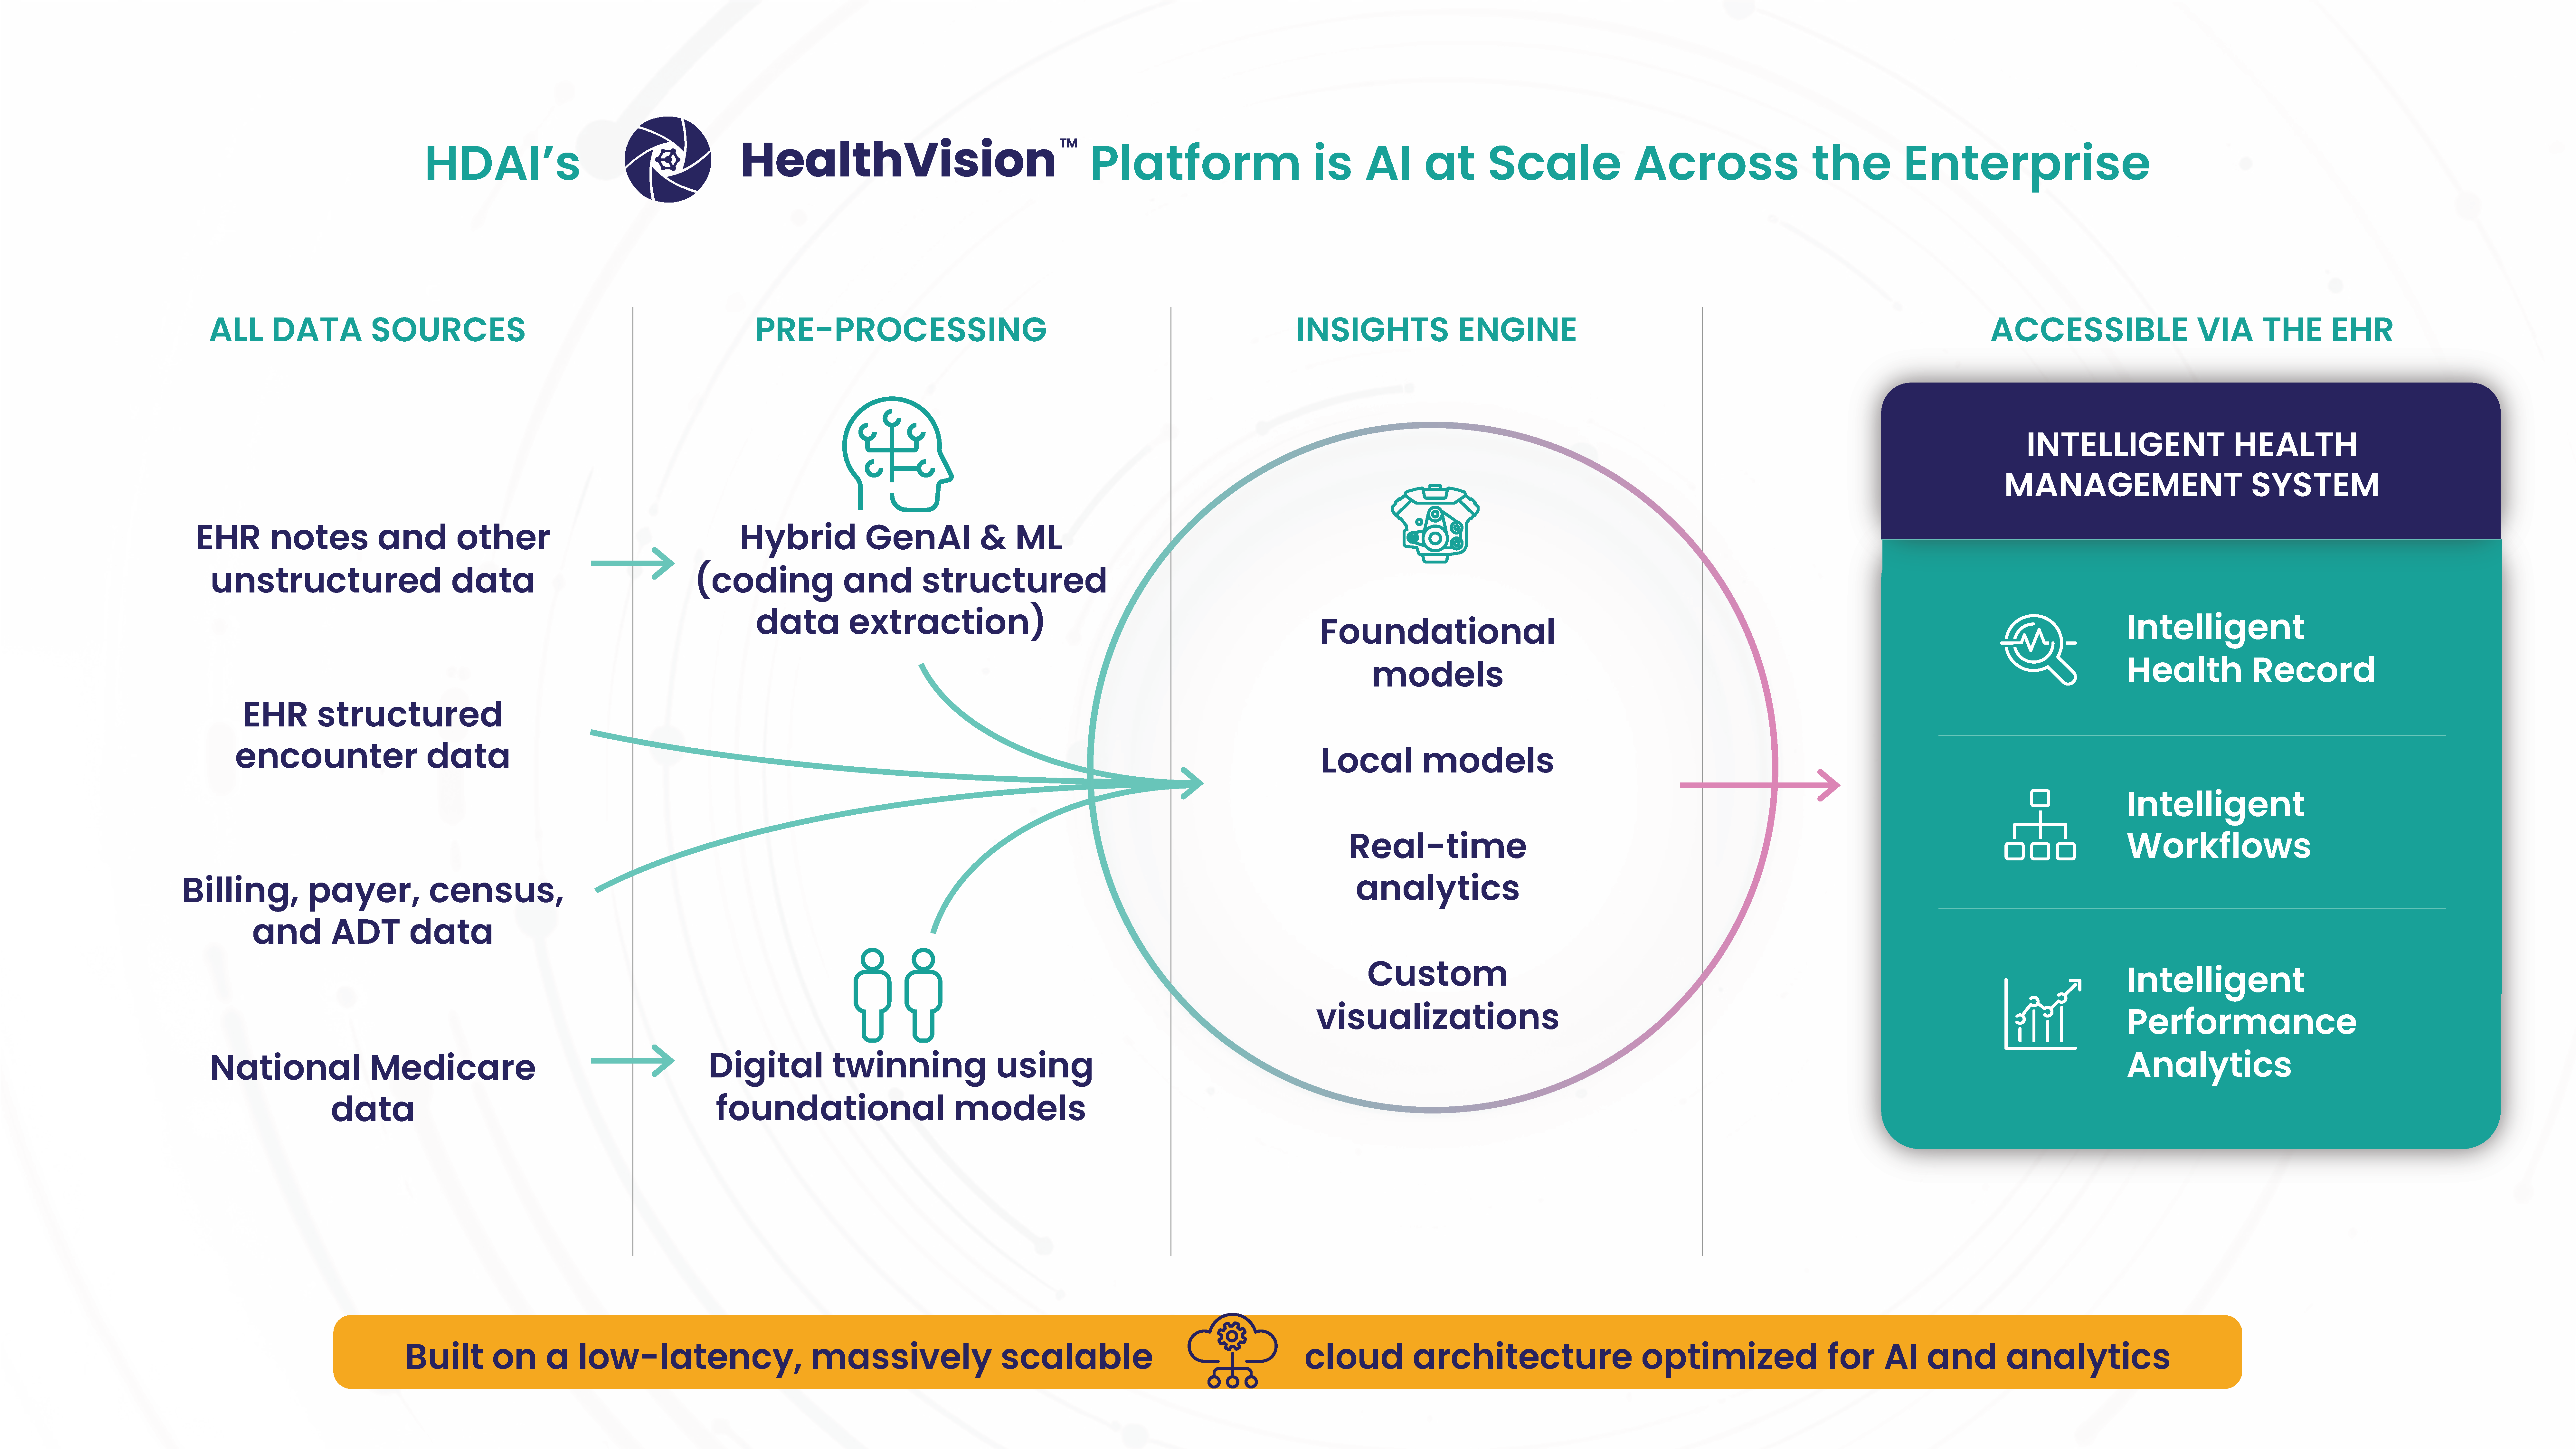 Overview of HDAI's HealthVision platform